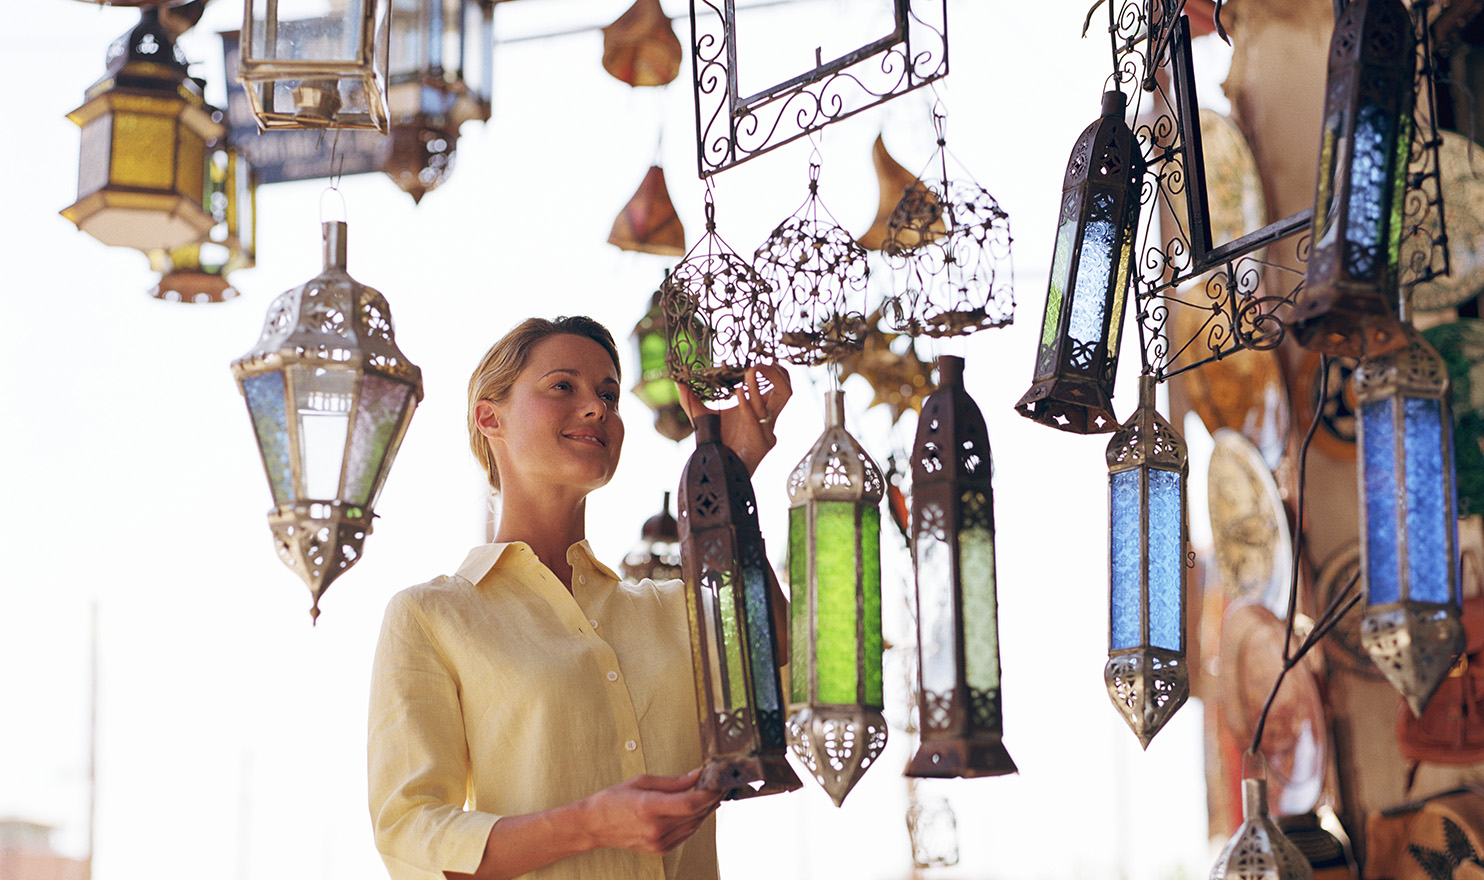 A woman is looking at the handcrafted glass on the lights hanging in a vendor tent at an outdoor event.